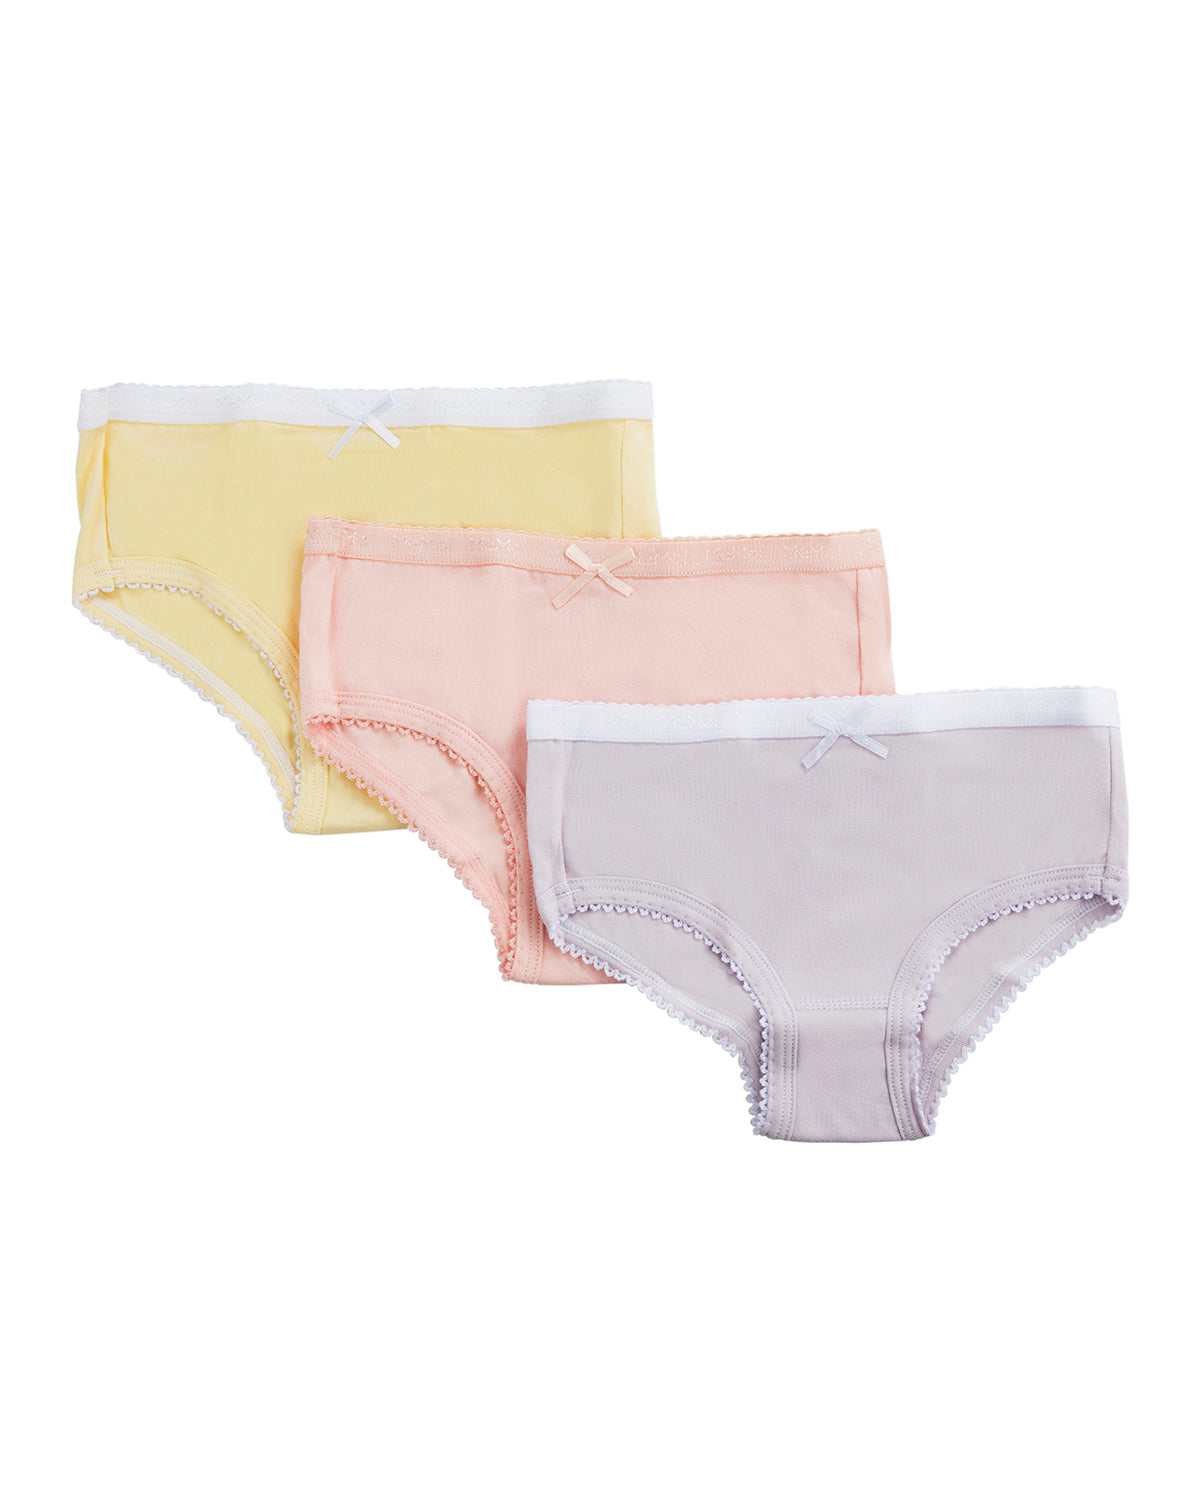 Girl's Solid Cotton Briefs 3-Pack